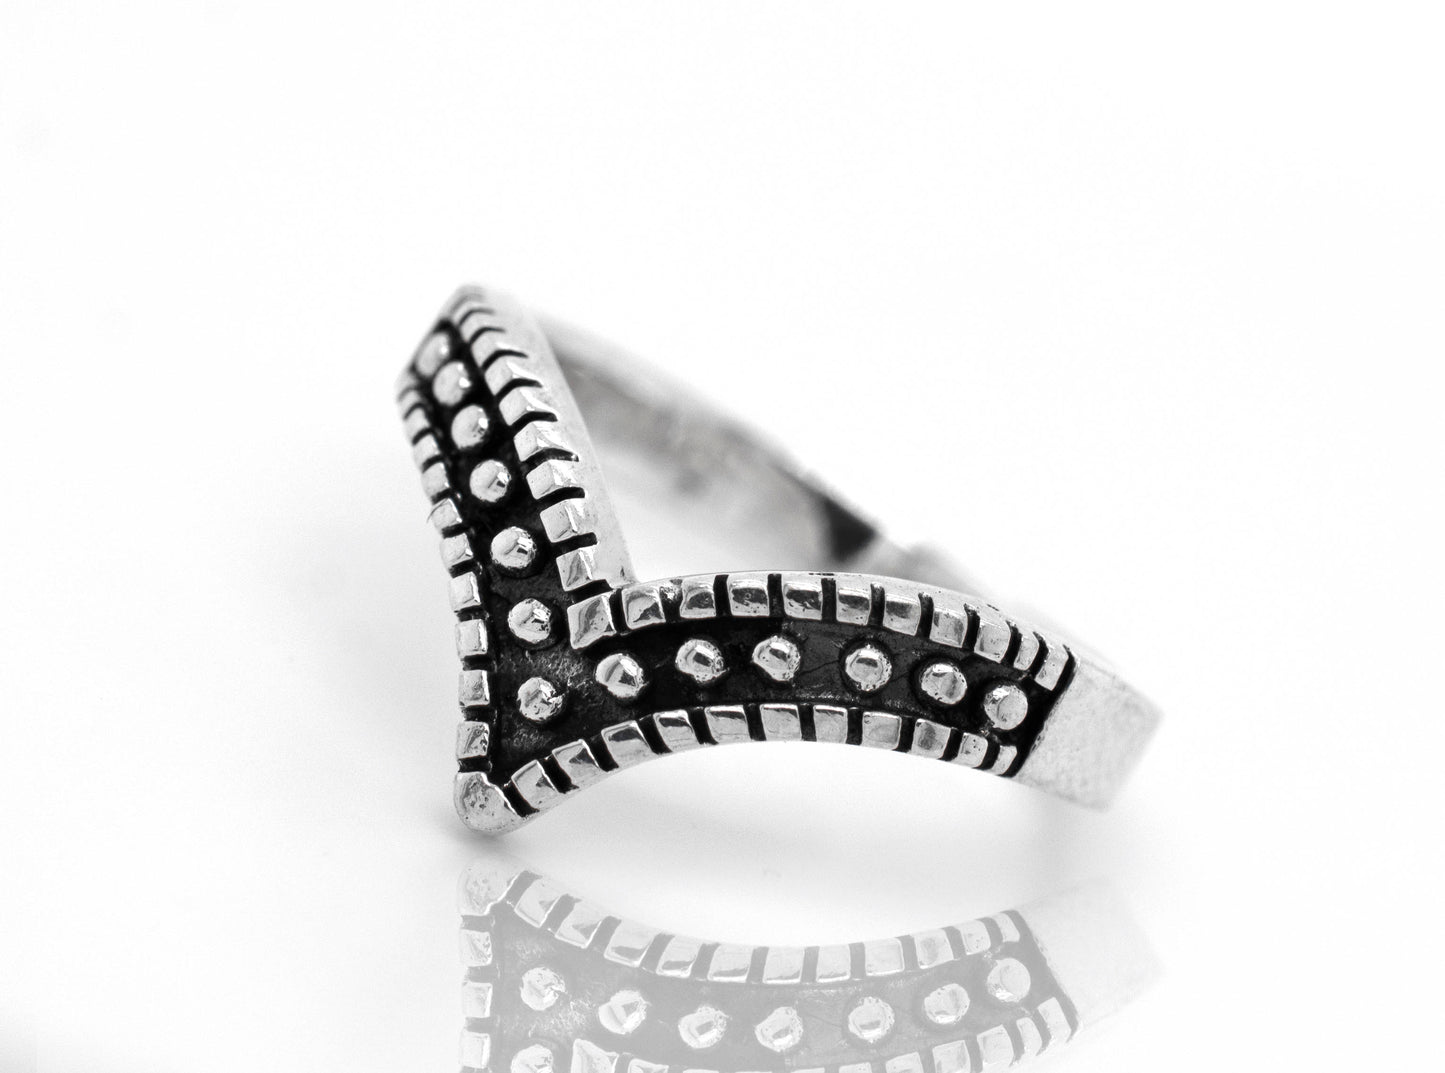 A striking chevron ring with black and white dots.